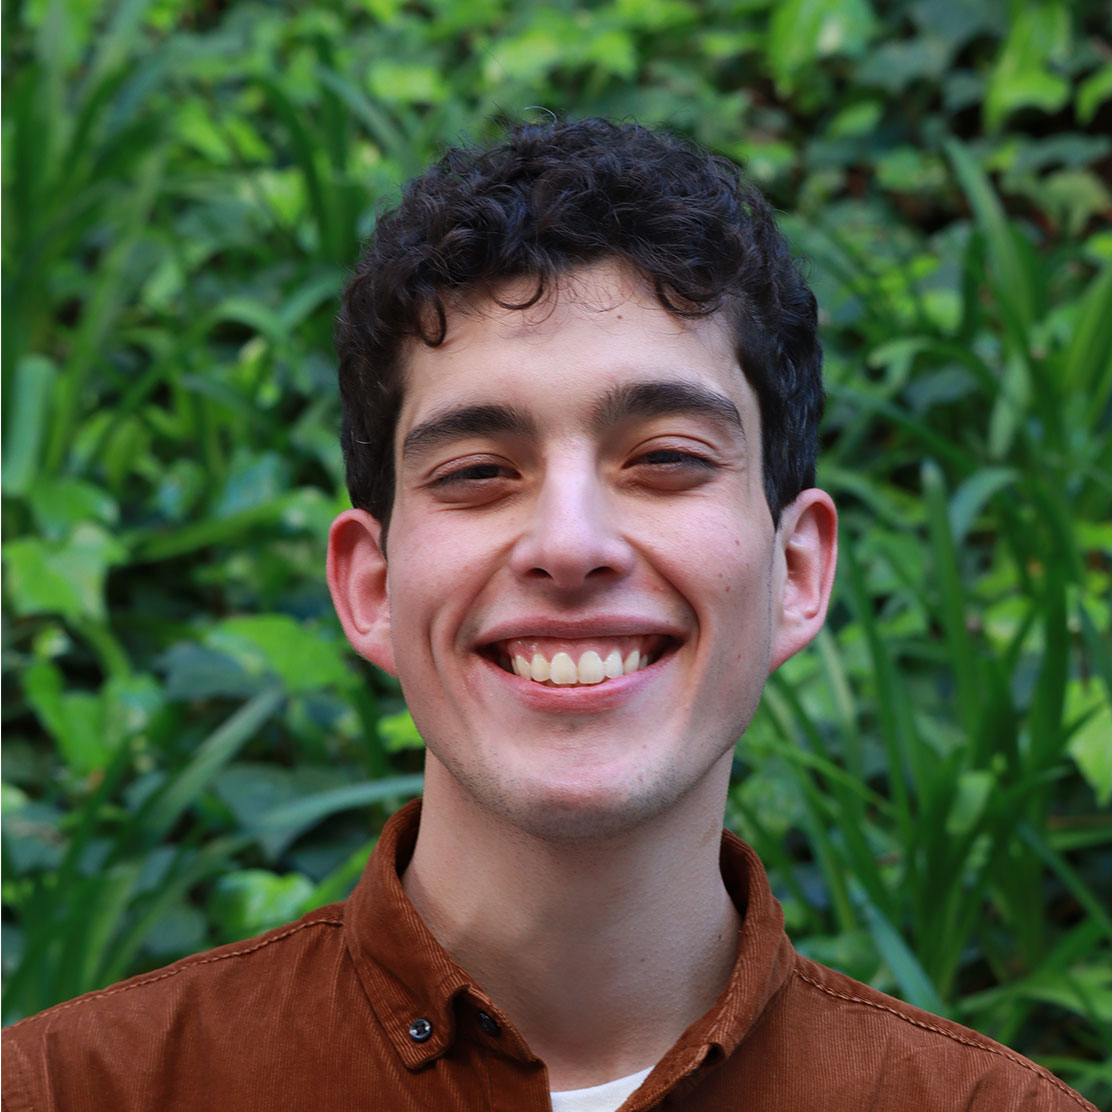 Headshot of scholar. Green plants behind scholar. Scholar has short clean cut black hair with curly bangs. Has thick black clean eyebrows. The Scholar is smiling big with teeth. They are wearing a brown button up shirt with a white cotton shirt underneath the brown shirt